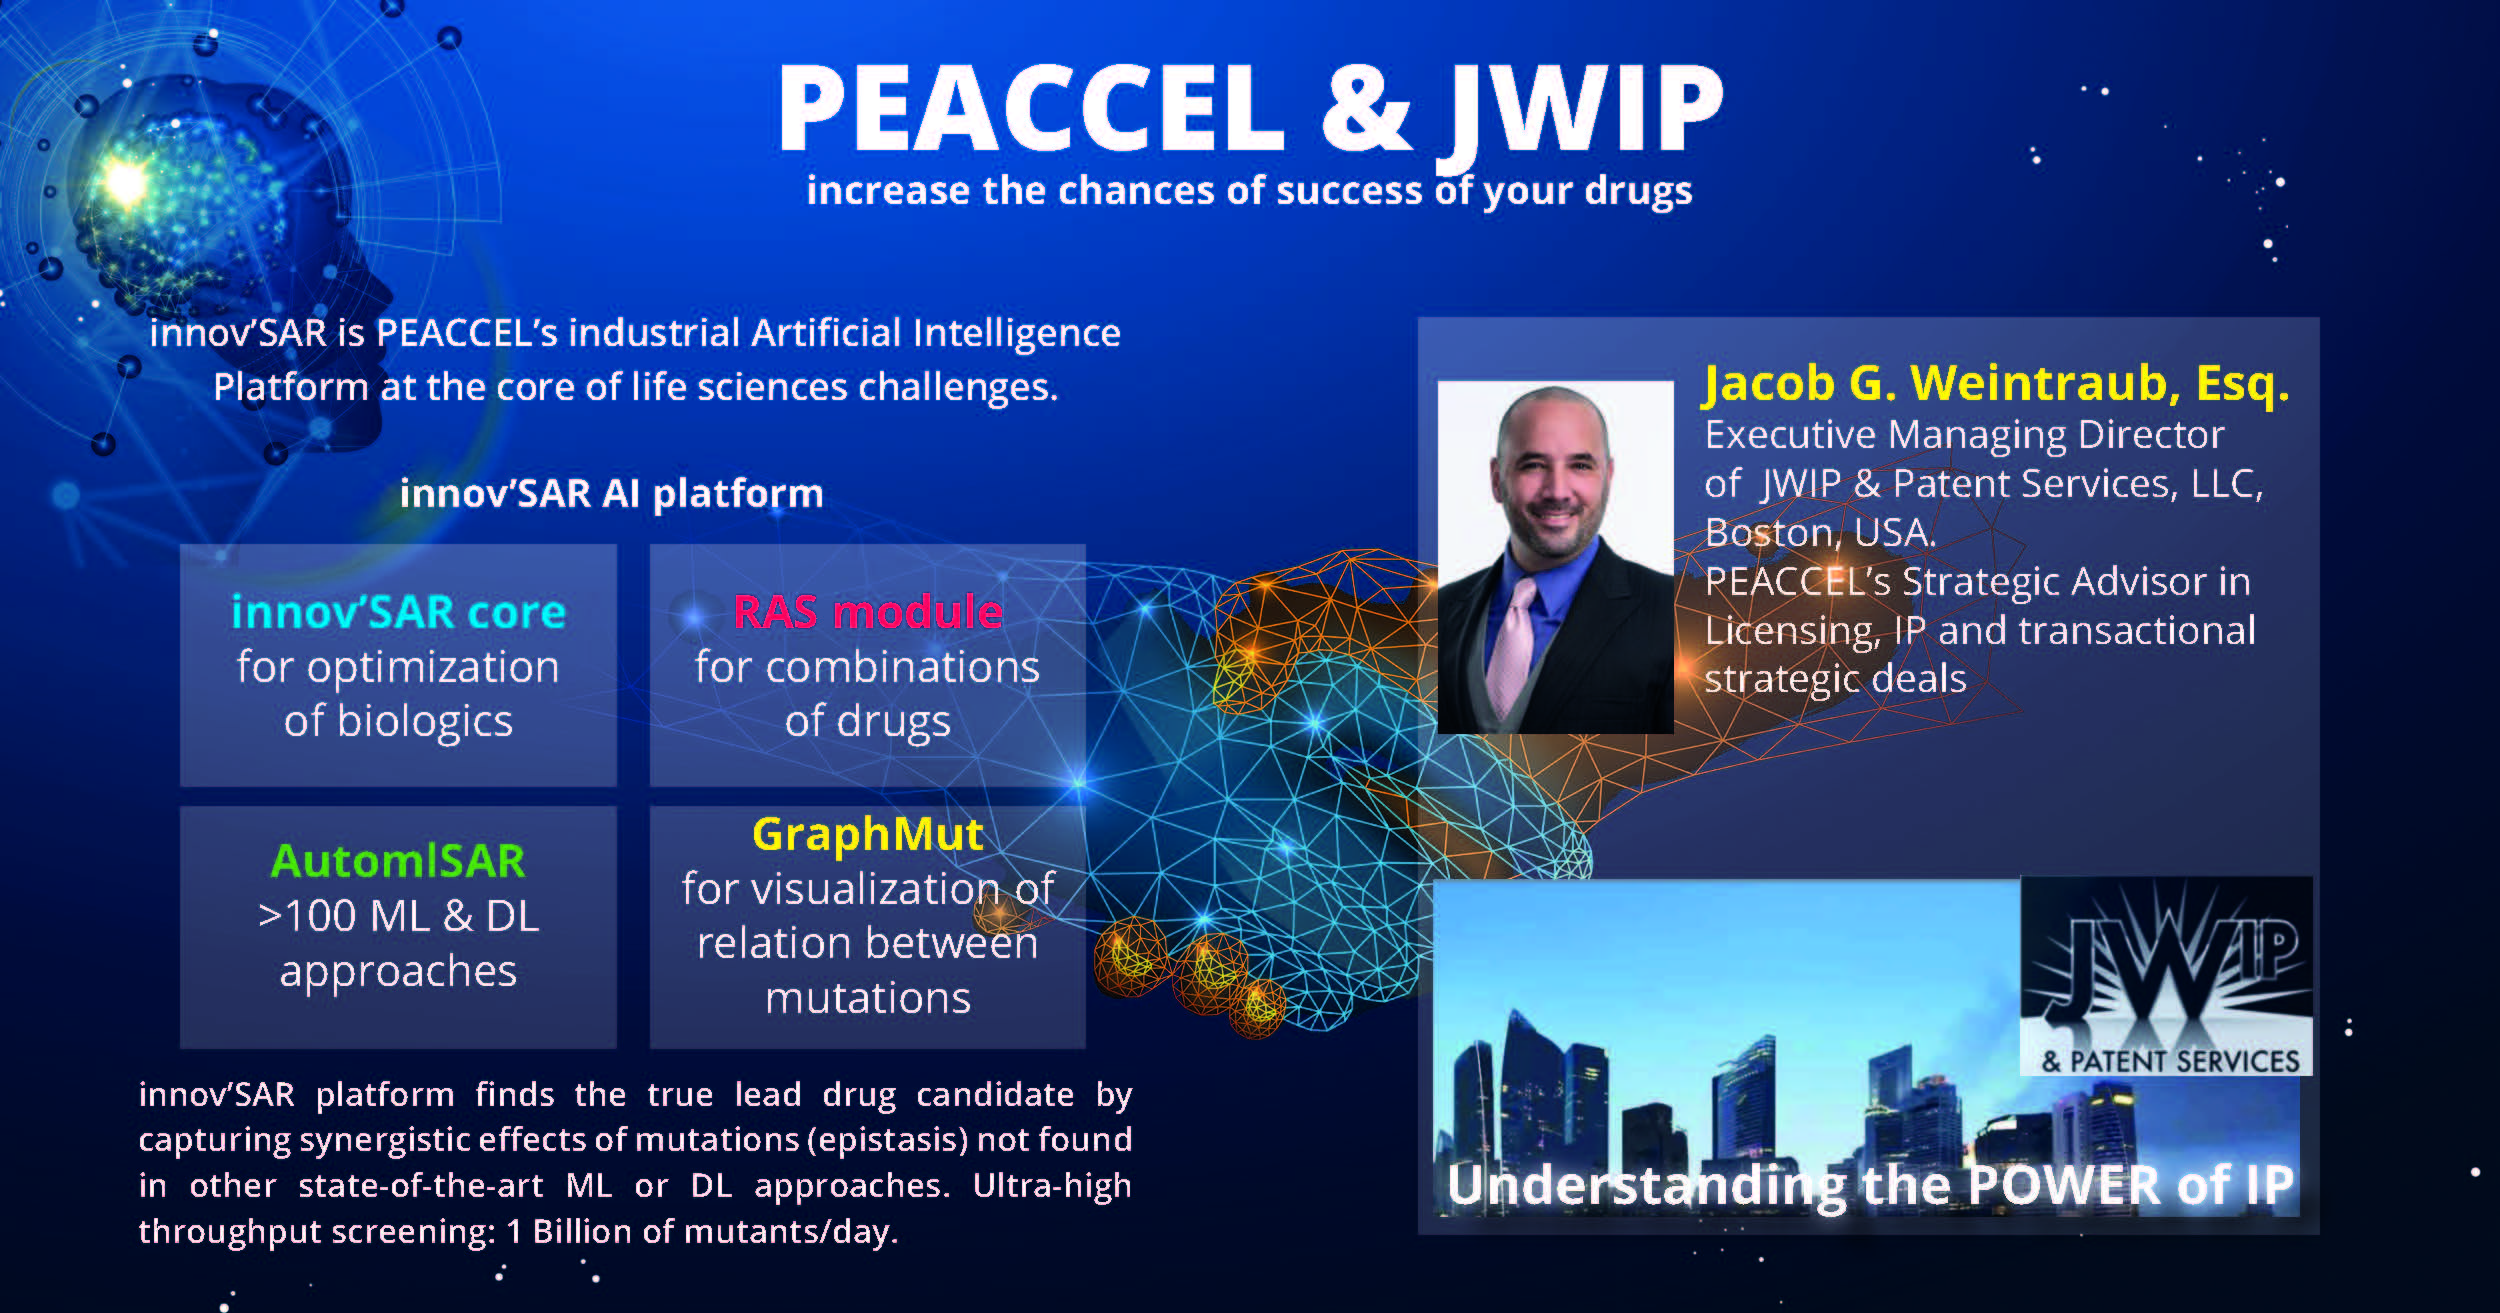 PEACCEL (Paris, Fr) and JWIP & Patent Services, LLC (Boston, USA) sign a strategic partnership to increase the chances of success of your drugs